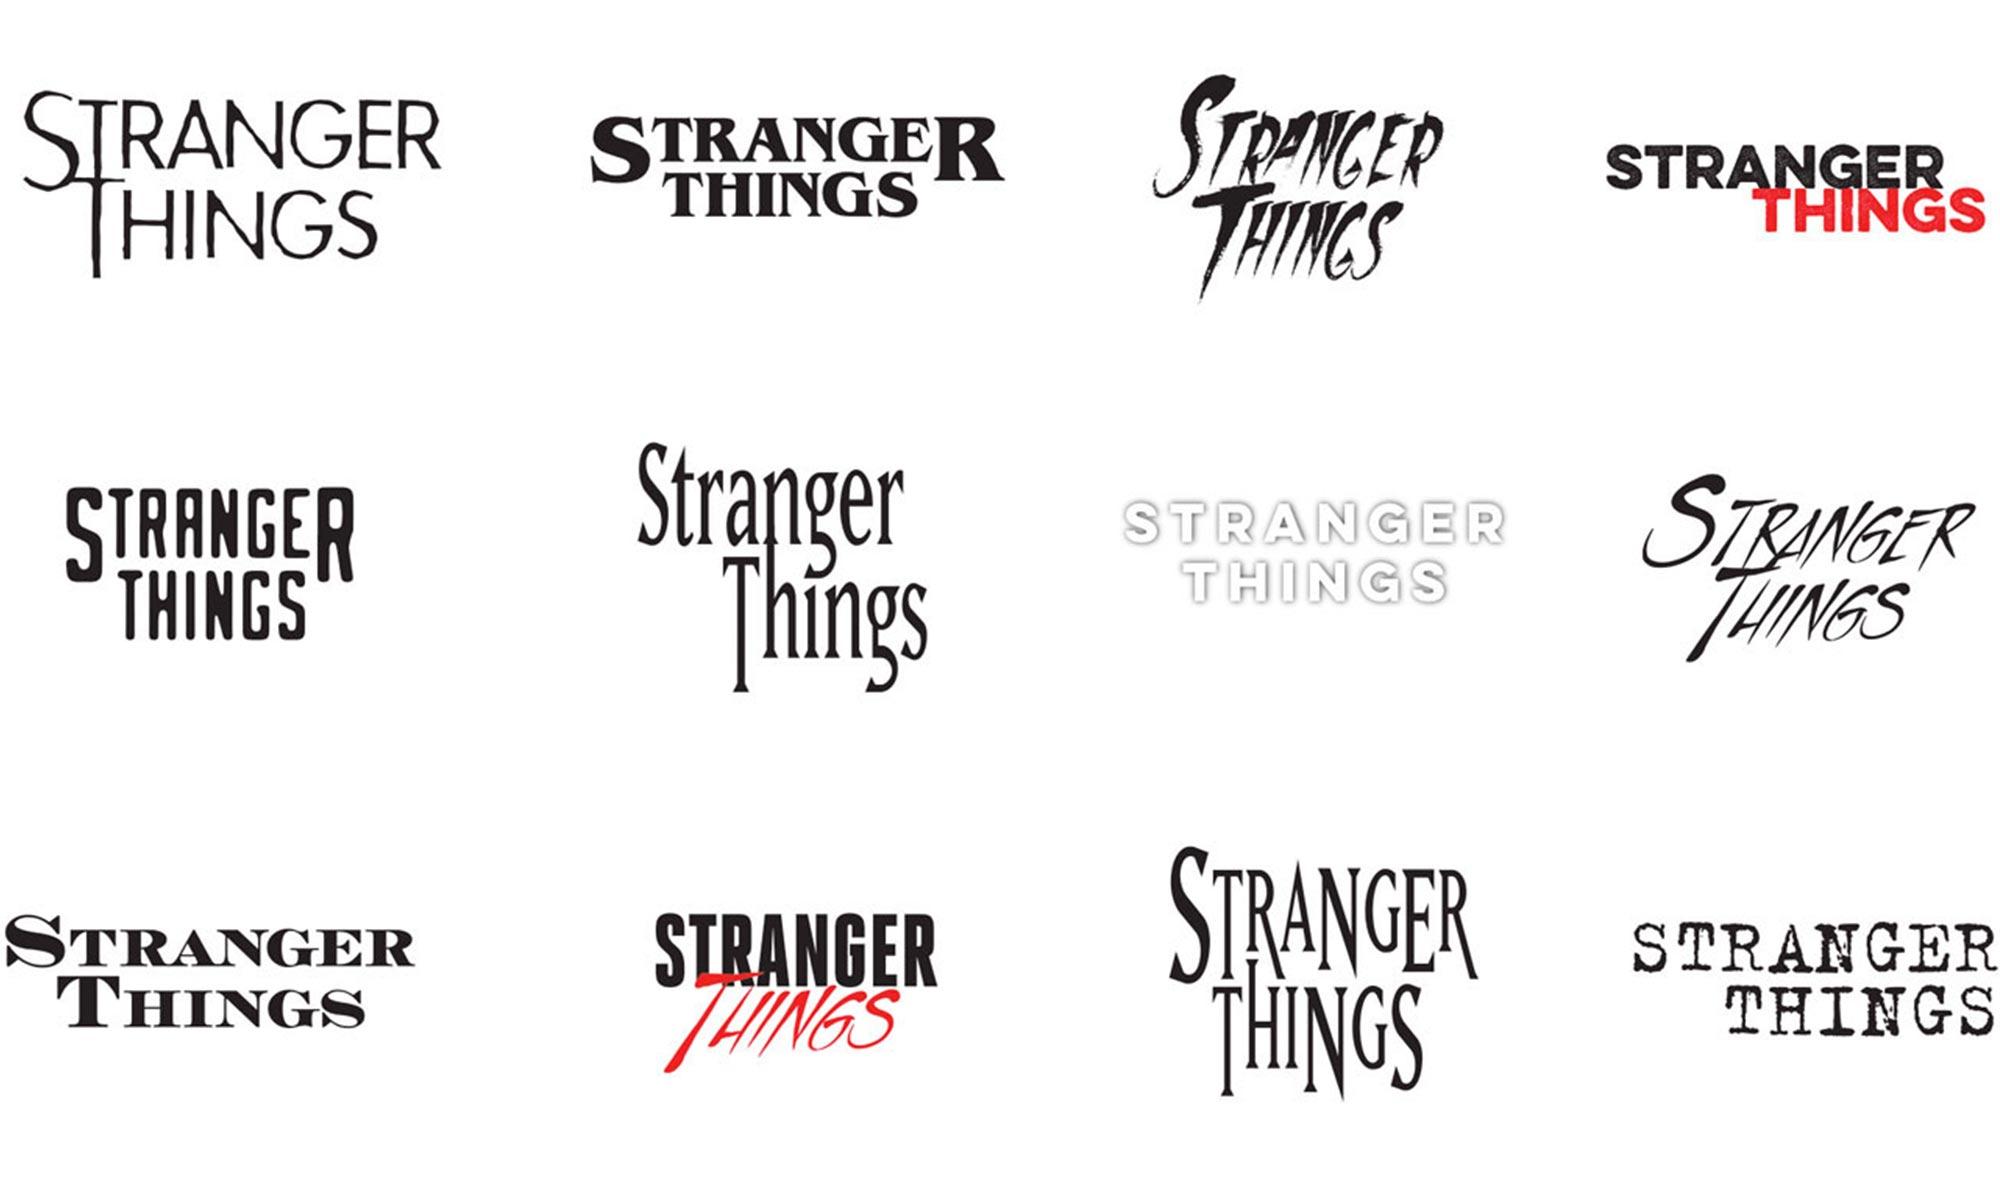 Stranger Things Logo - Eleven things you didn't know about the Stranger Things typeface